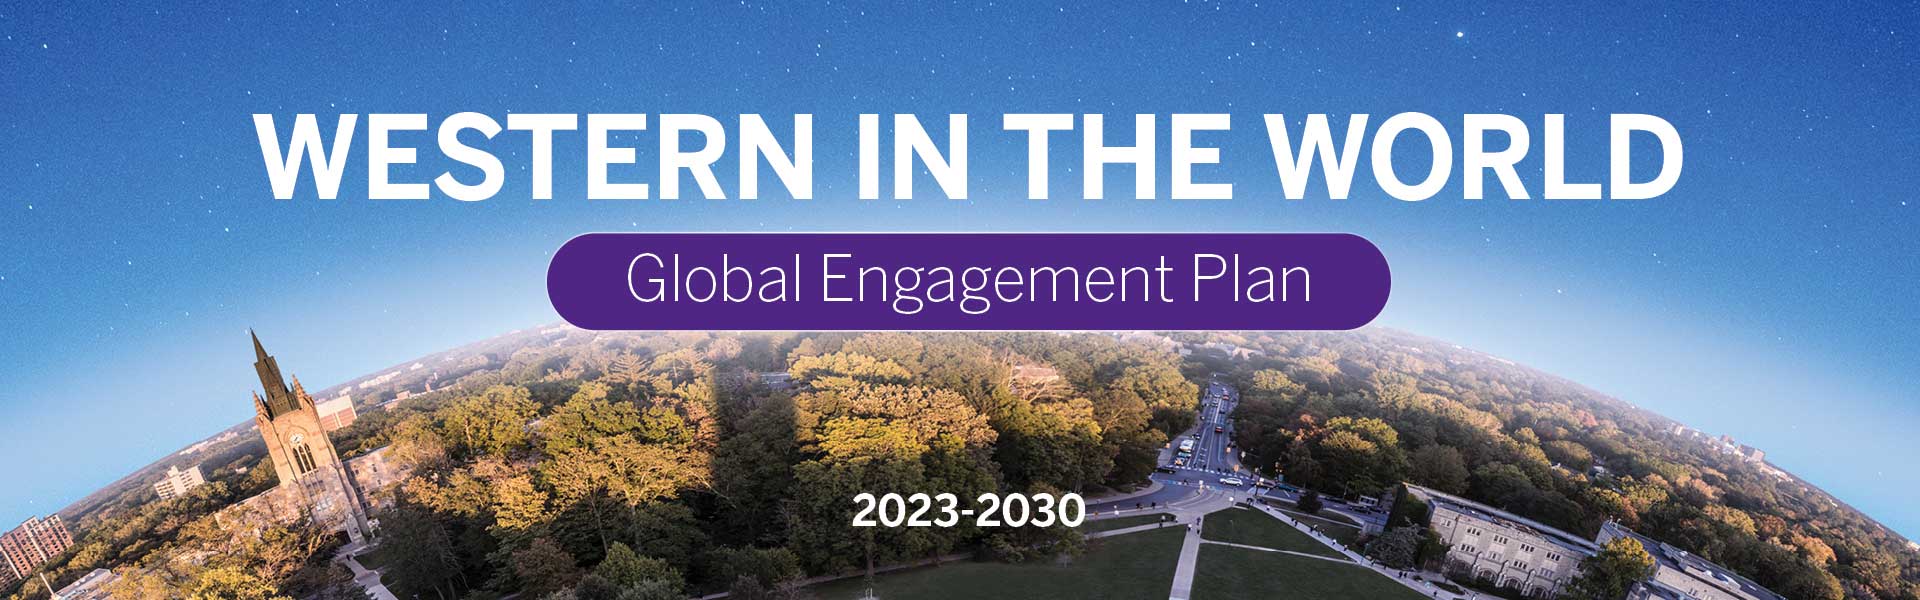 Text that says "Western in the World: Global Engagement Plan. 2023-2030"